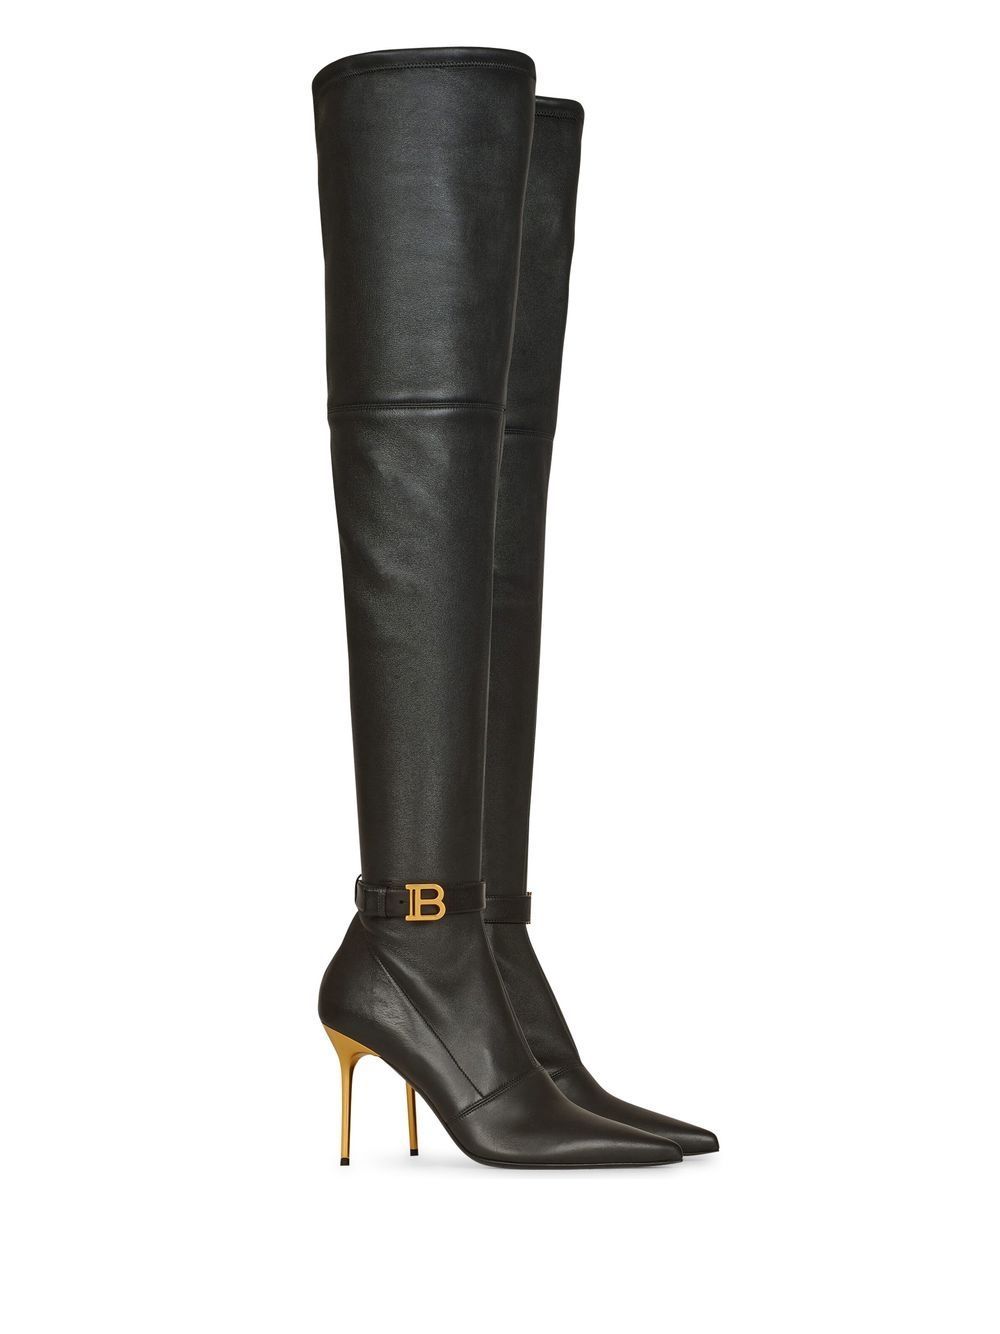 Stiletto Boots Compliment Your
Personality